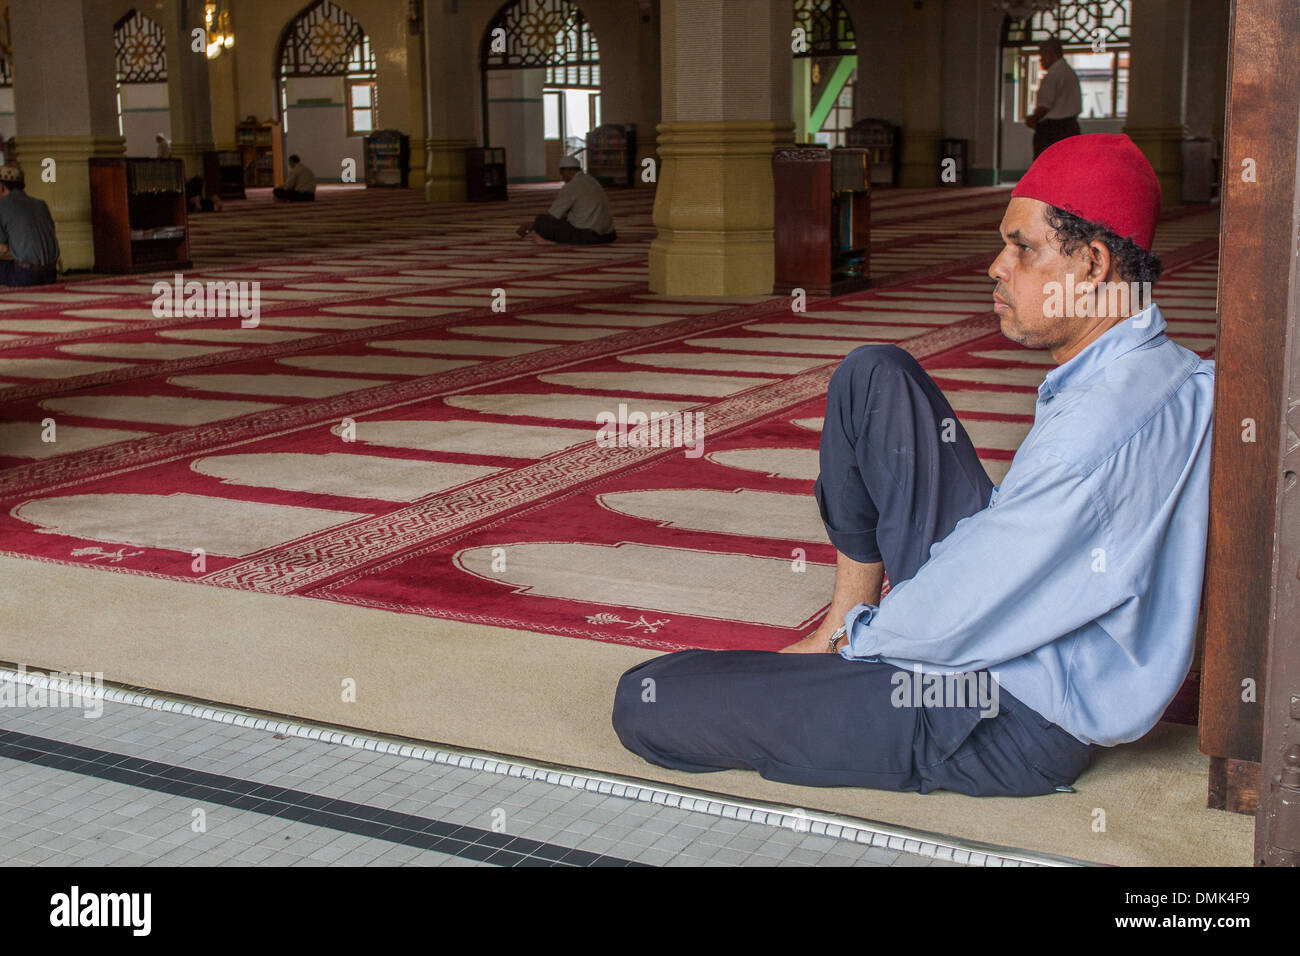 MUSLIM MEDITATING NEAR THE PRAYER RUGS OF THE MASJID SULTAN MOSQUE, THE MAIN MOSQUE FOR THE MALAYSIAN AND INDONESIAN COMMUNITY OF SINGAPORE, NEIGHBORHOOD OF KAMPONG GLAM, SINGAPORE Stock Photo